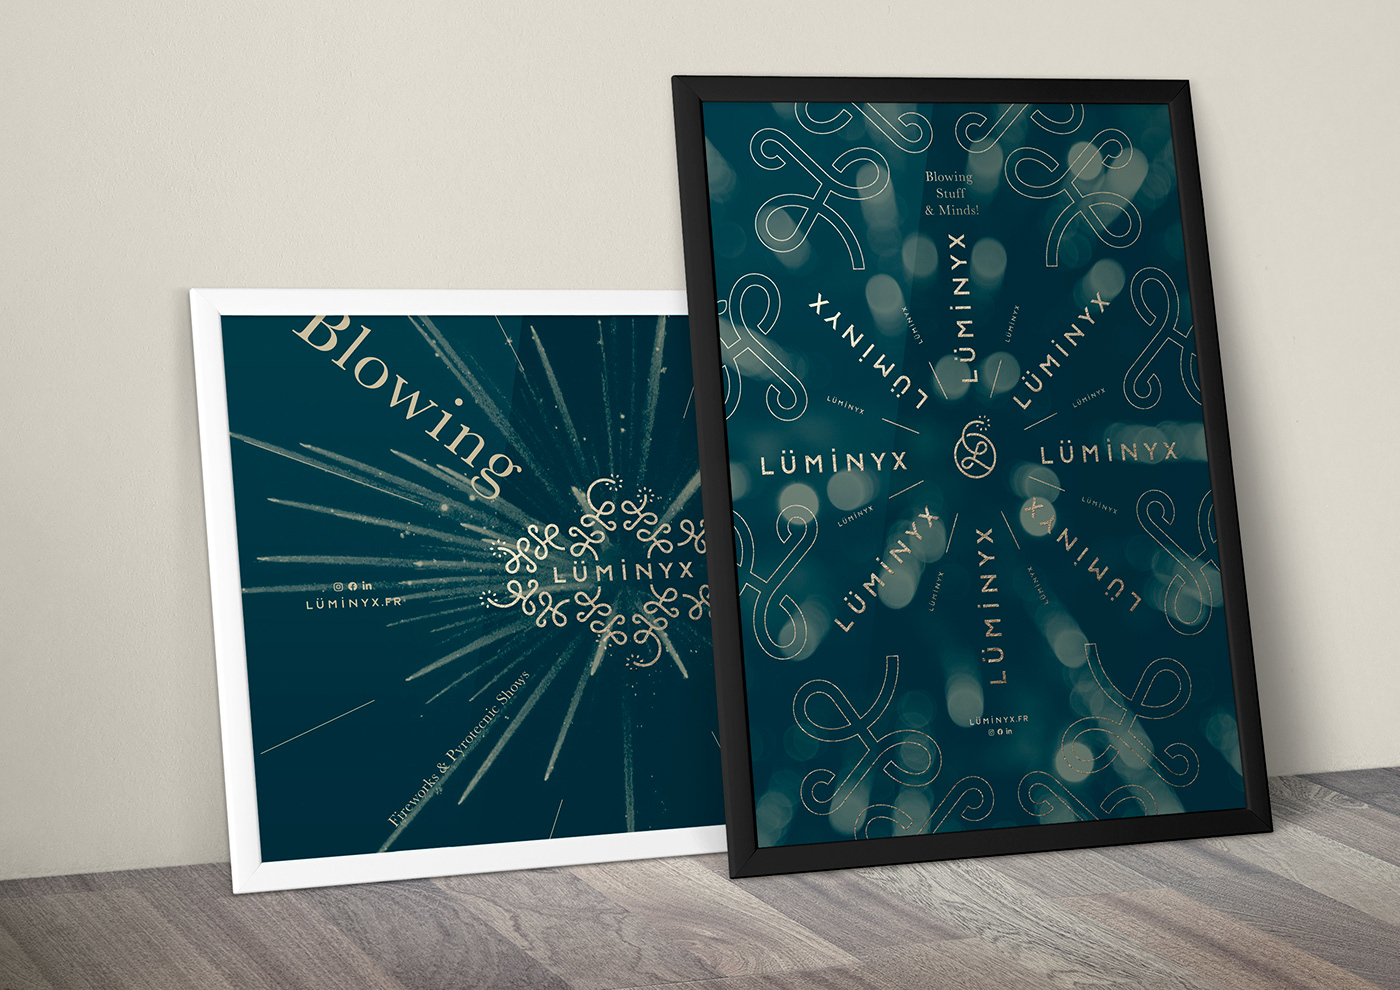 Framed poster design representing explosions of fireworks for Luminyx's new corporate identity